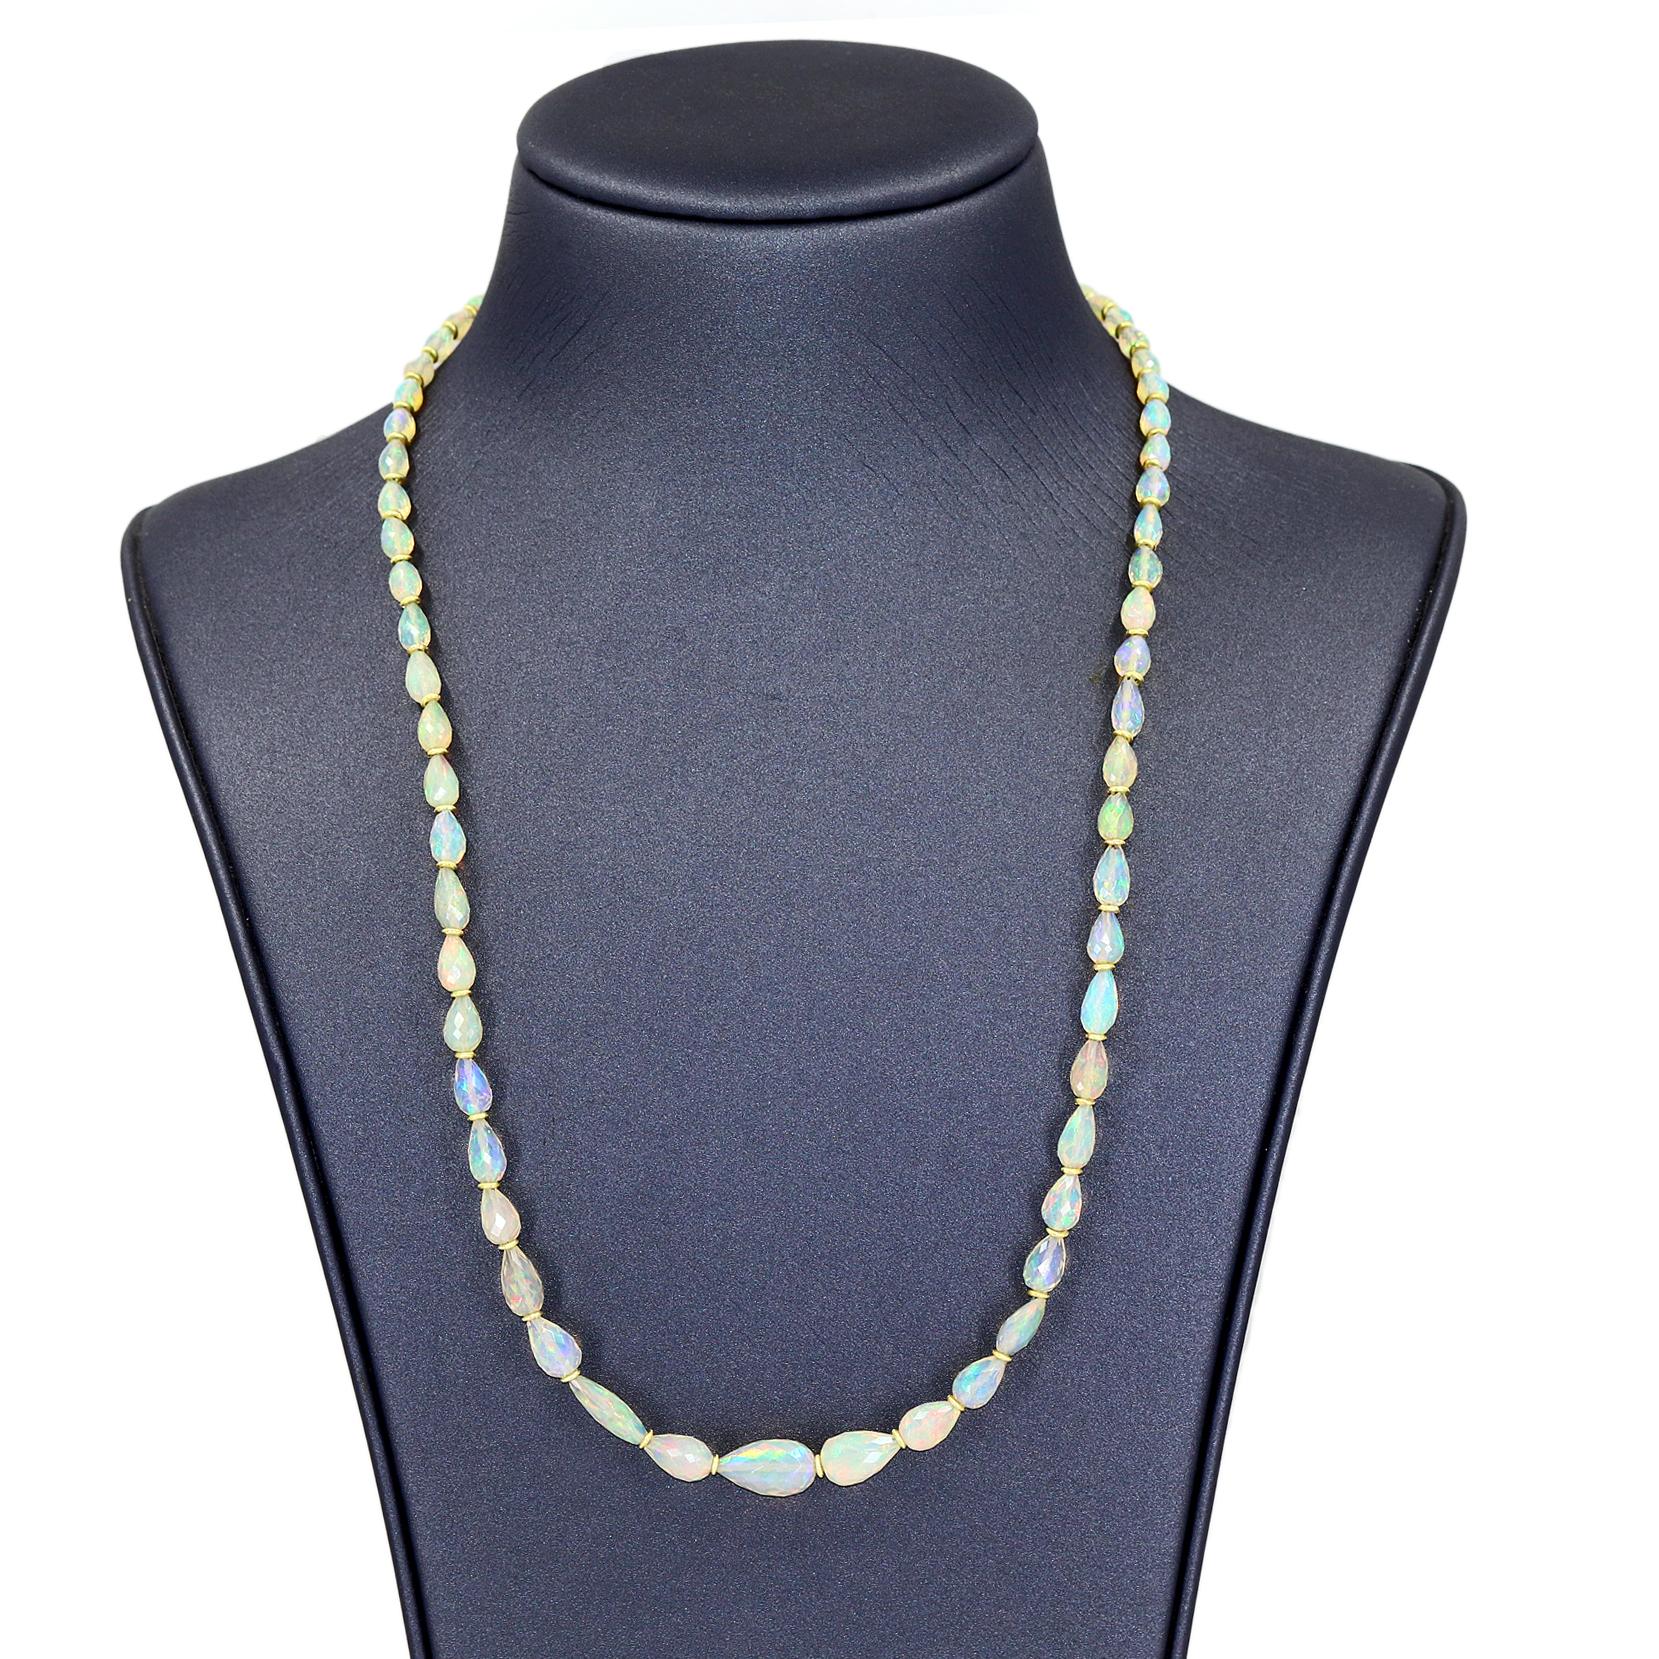 Artist Petra Class Fiery Faceted Opal One-of-a-Kind Segments Necklace